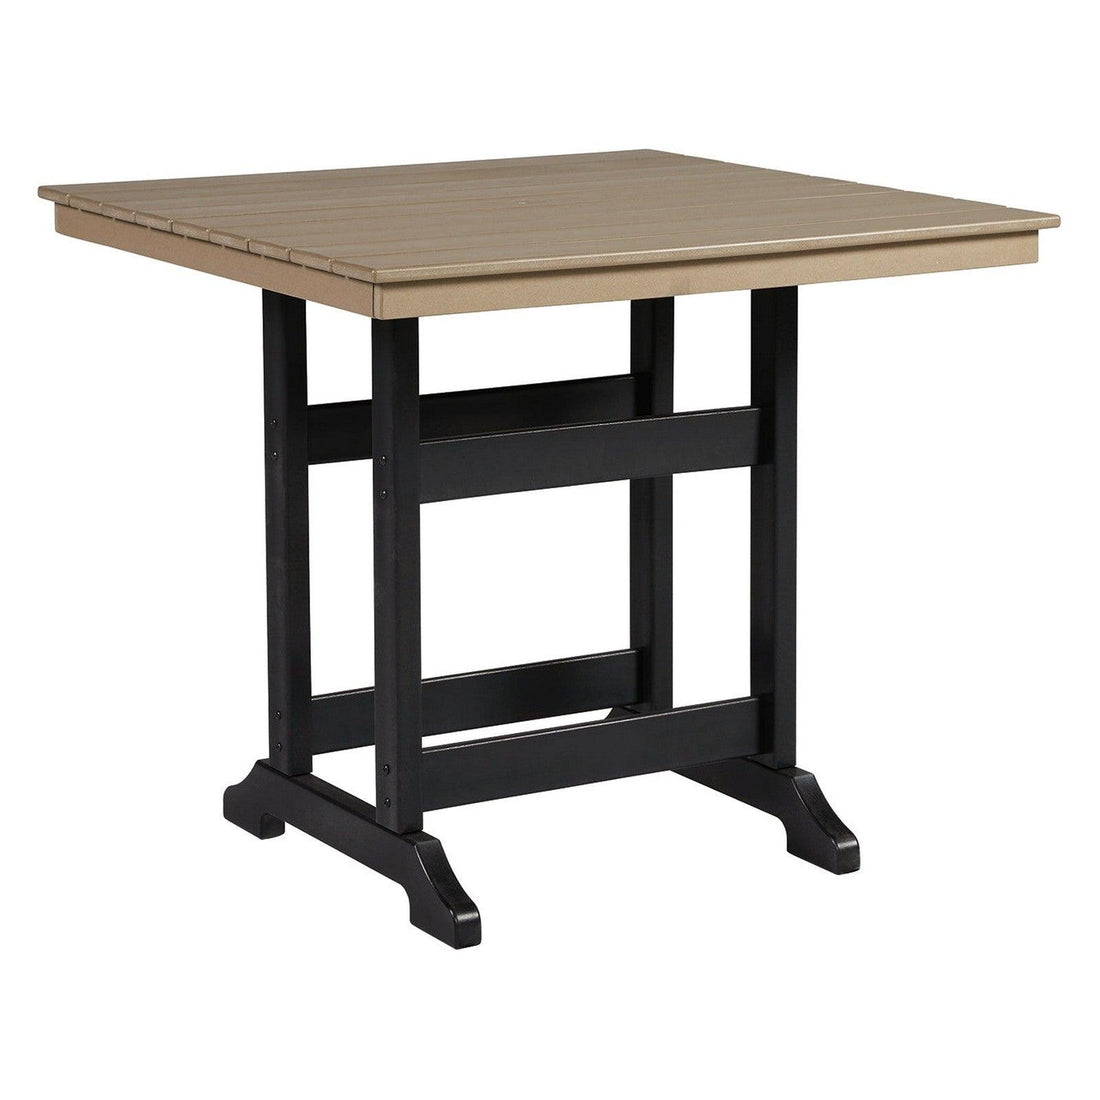 Fairen Trail Outdoor Counter Height Dining Table Ash-P211-632